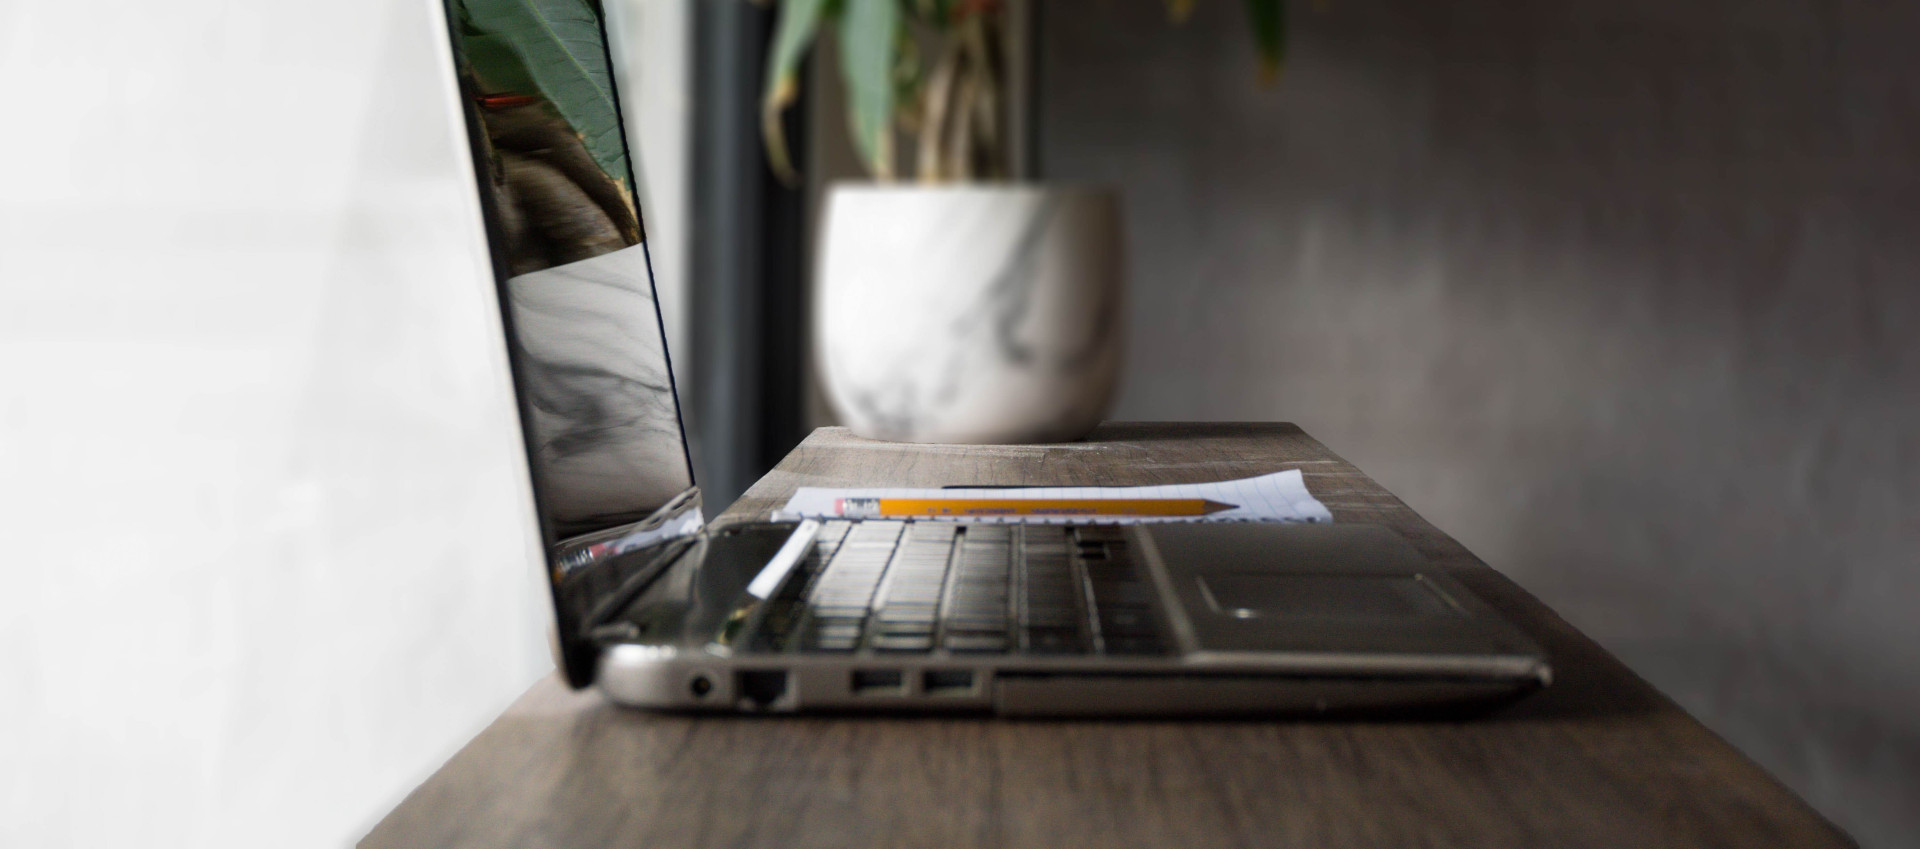 side view of laptop, notepad and pencil on a skinny wooden table with blurred out plant in background